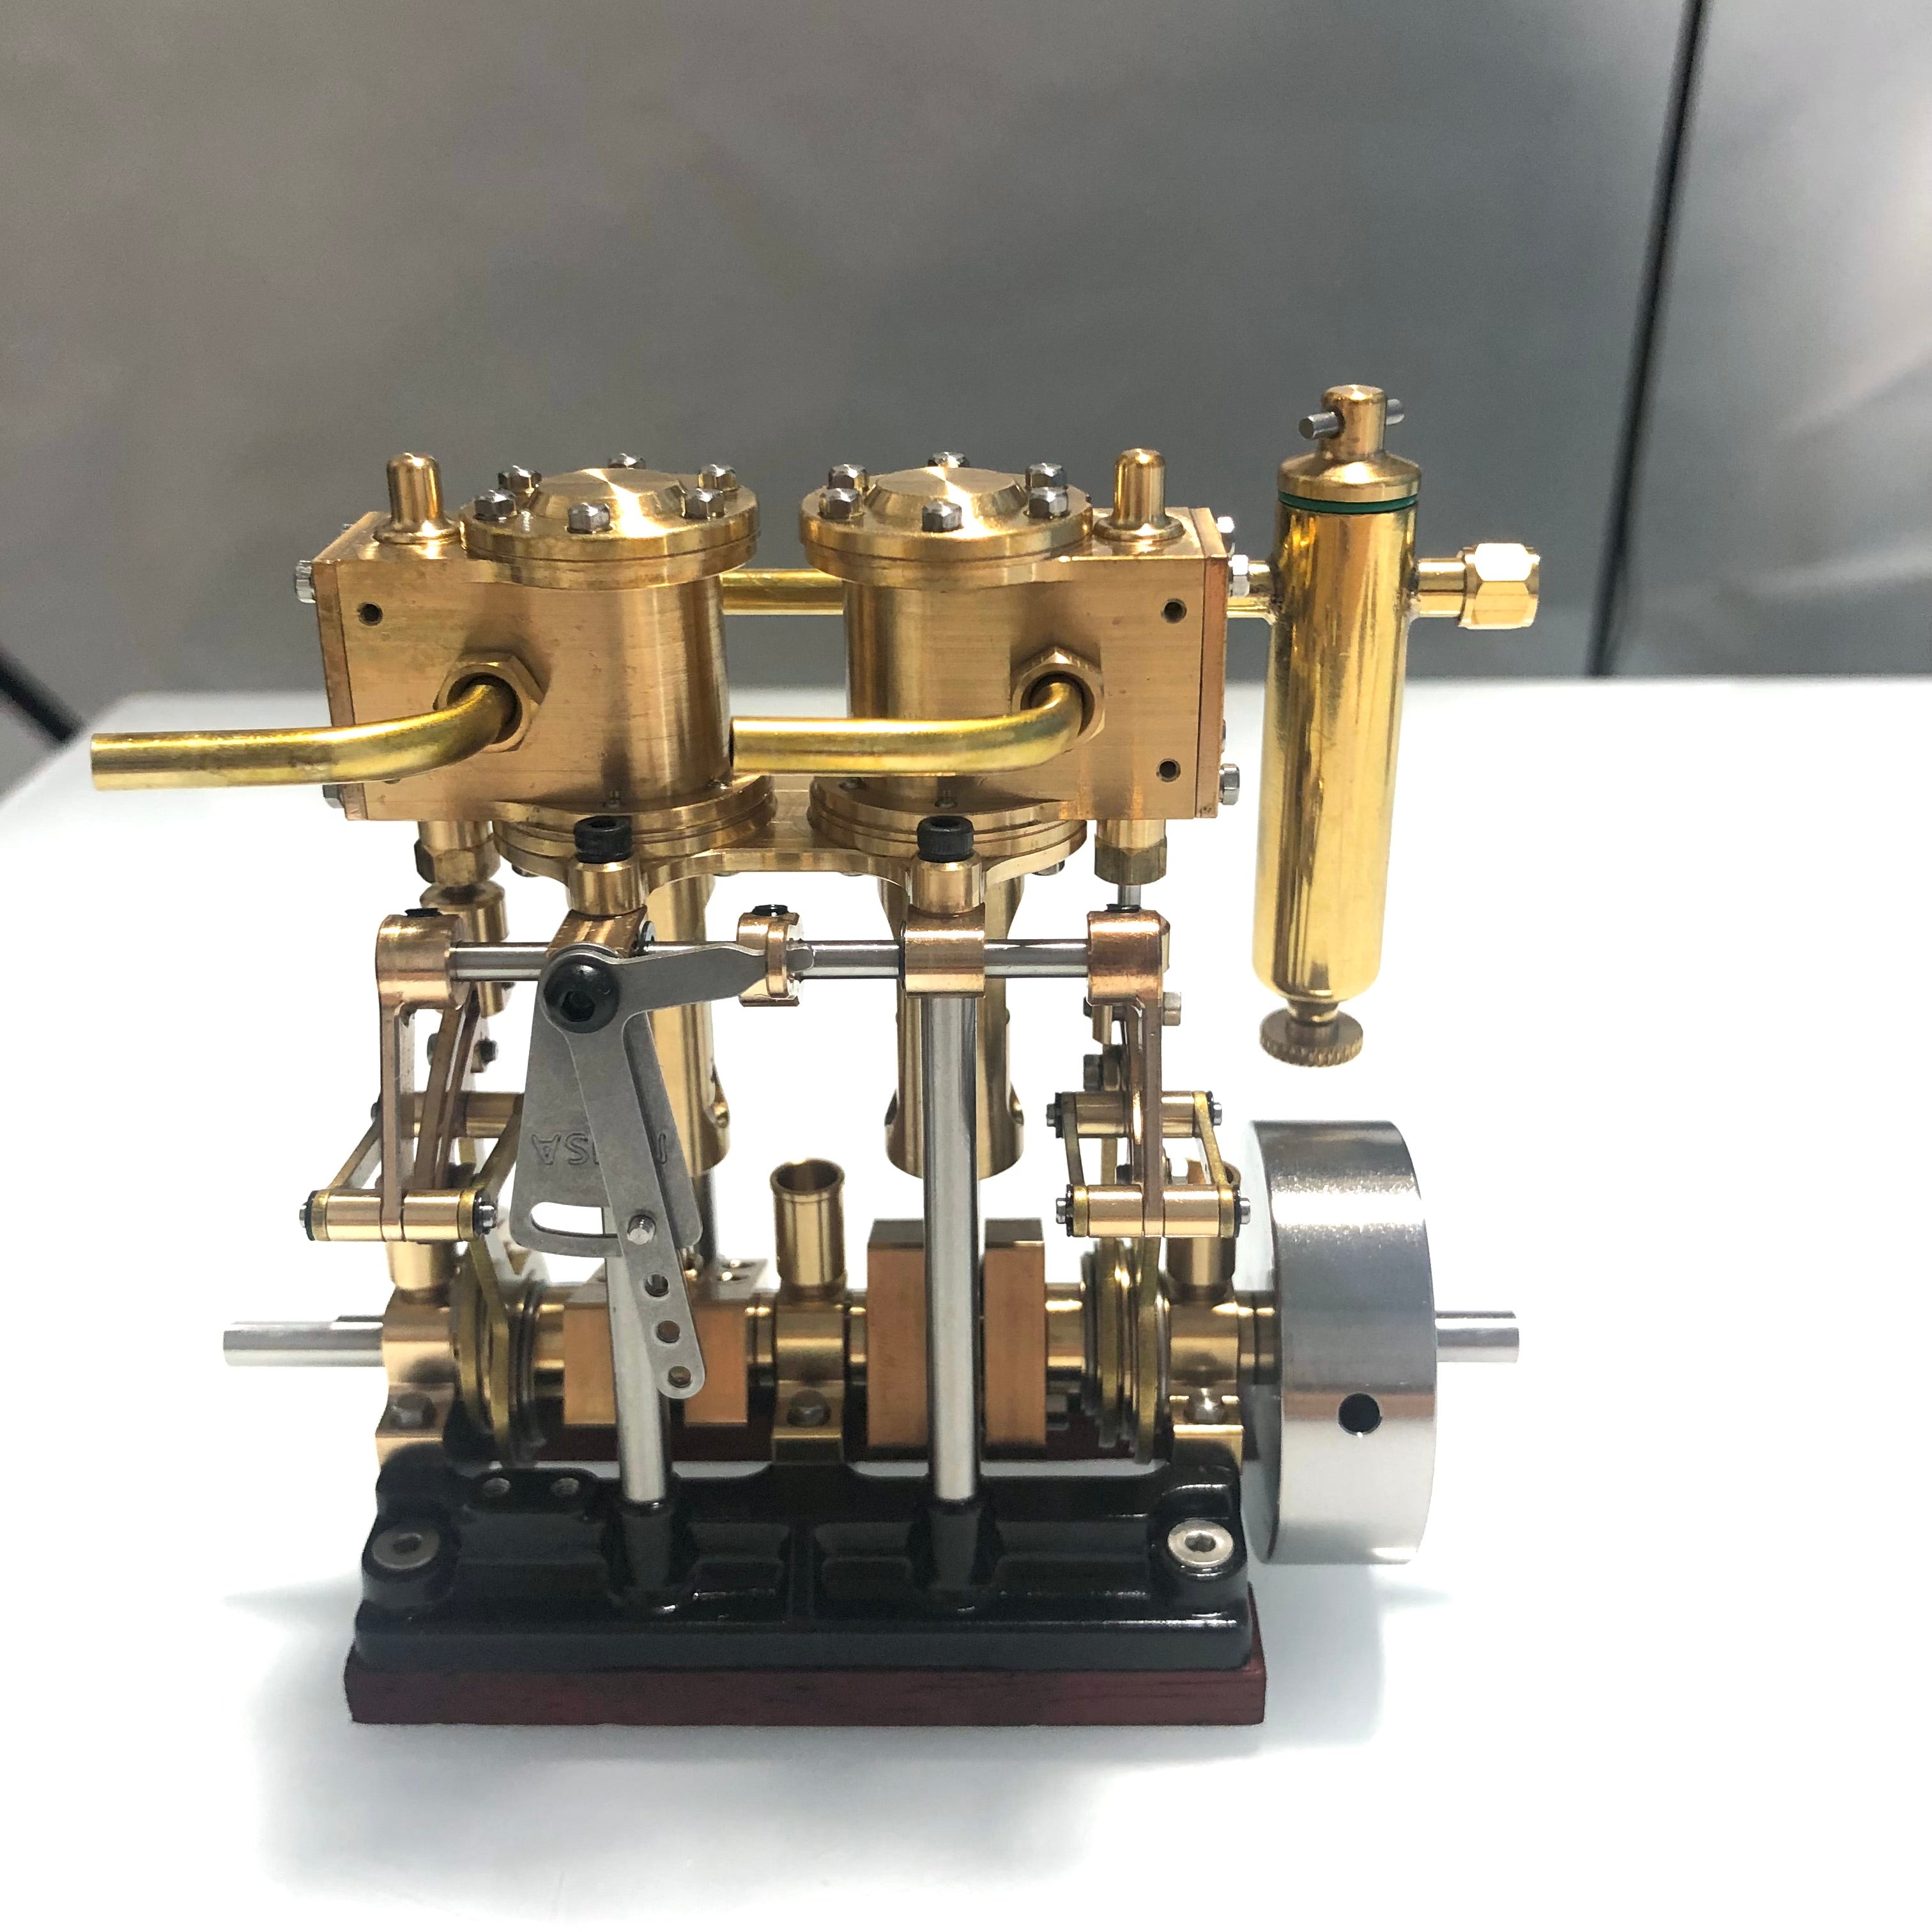 KACIO LS2-13S Vertical Two-cylinder Marine Engine  Steam Engine Model with Oil Cup Support Forward and Reverse Rotation enginediyshop